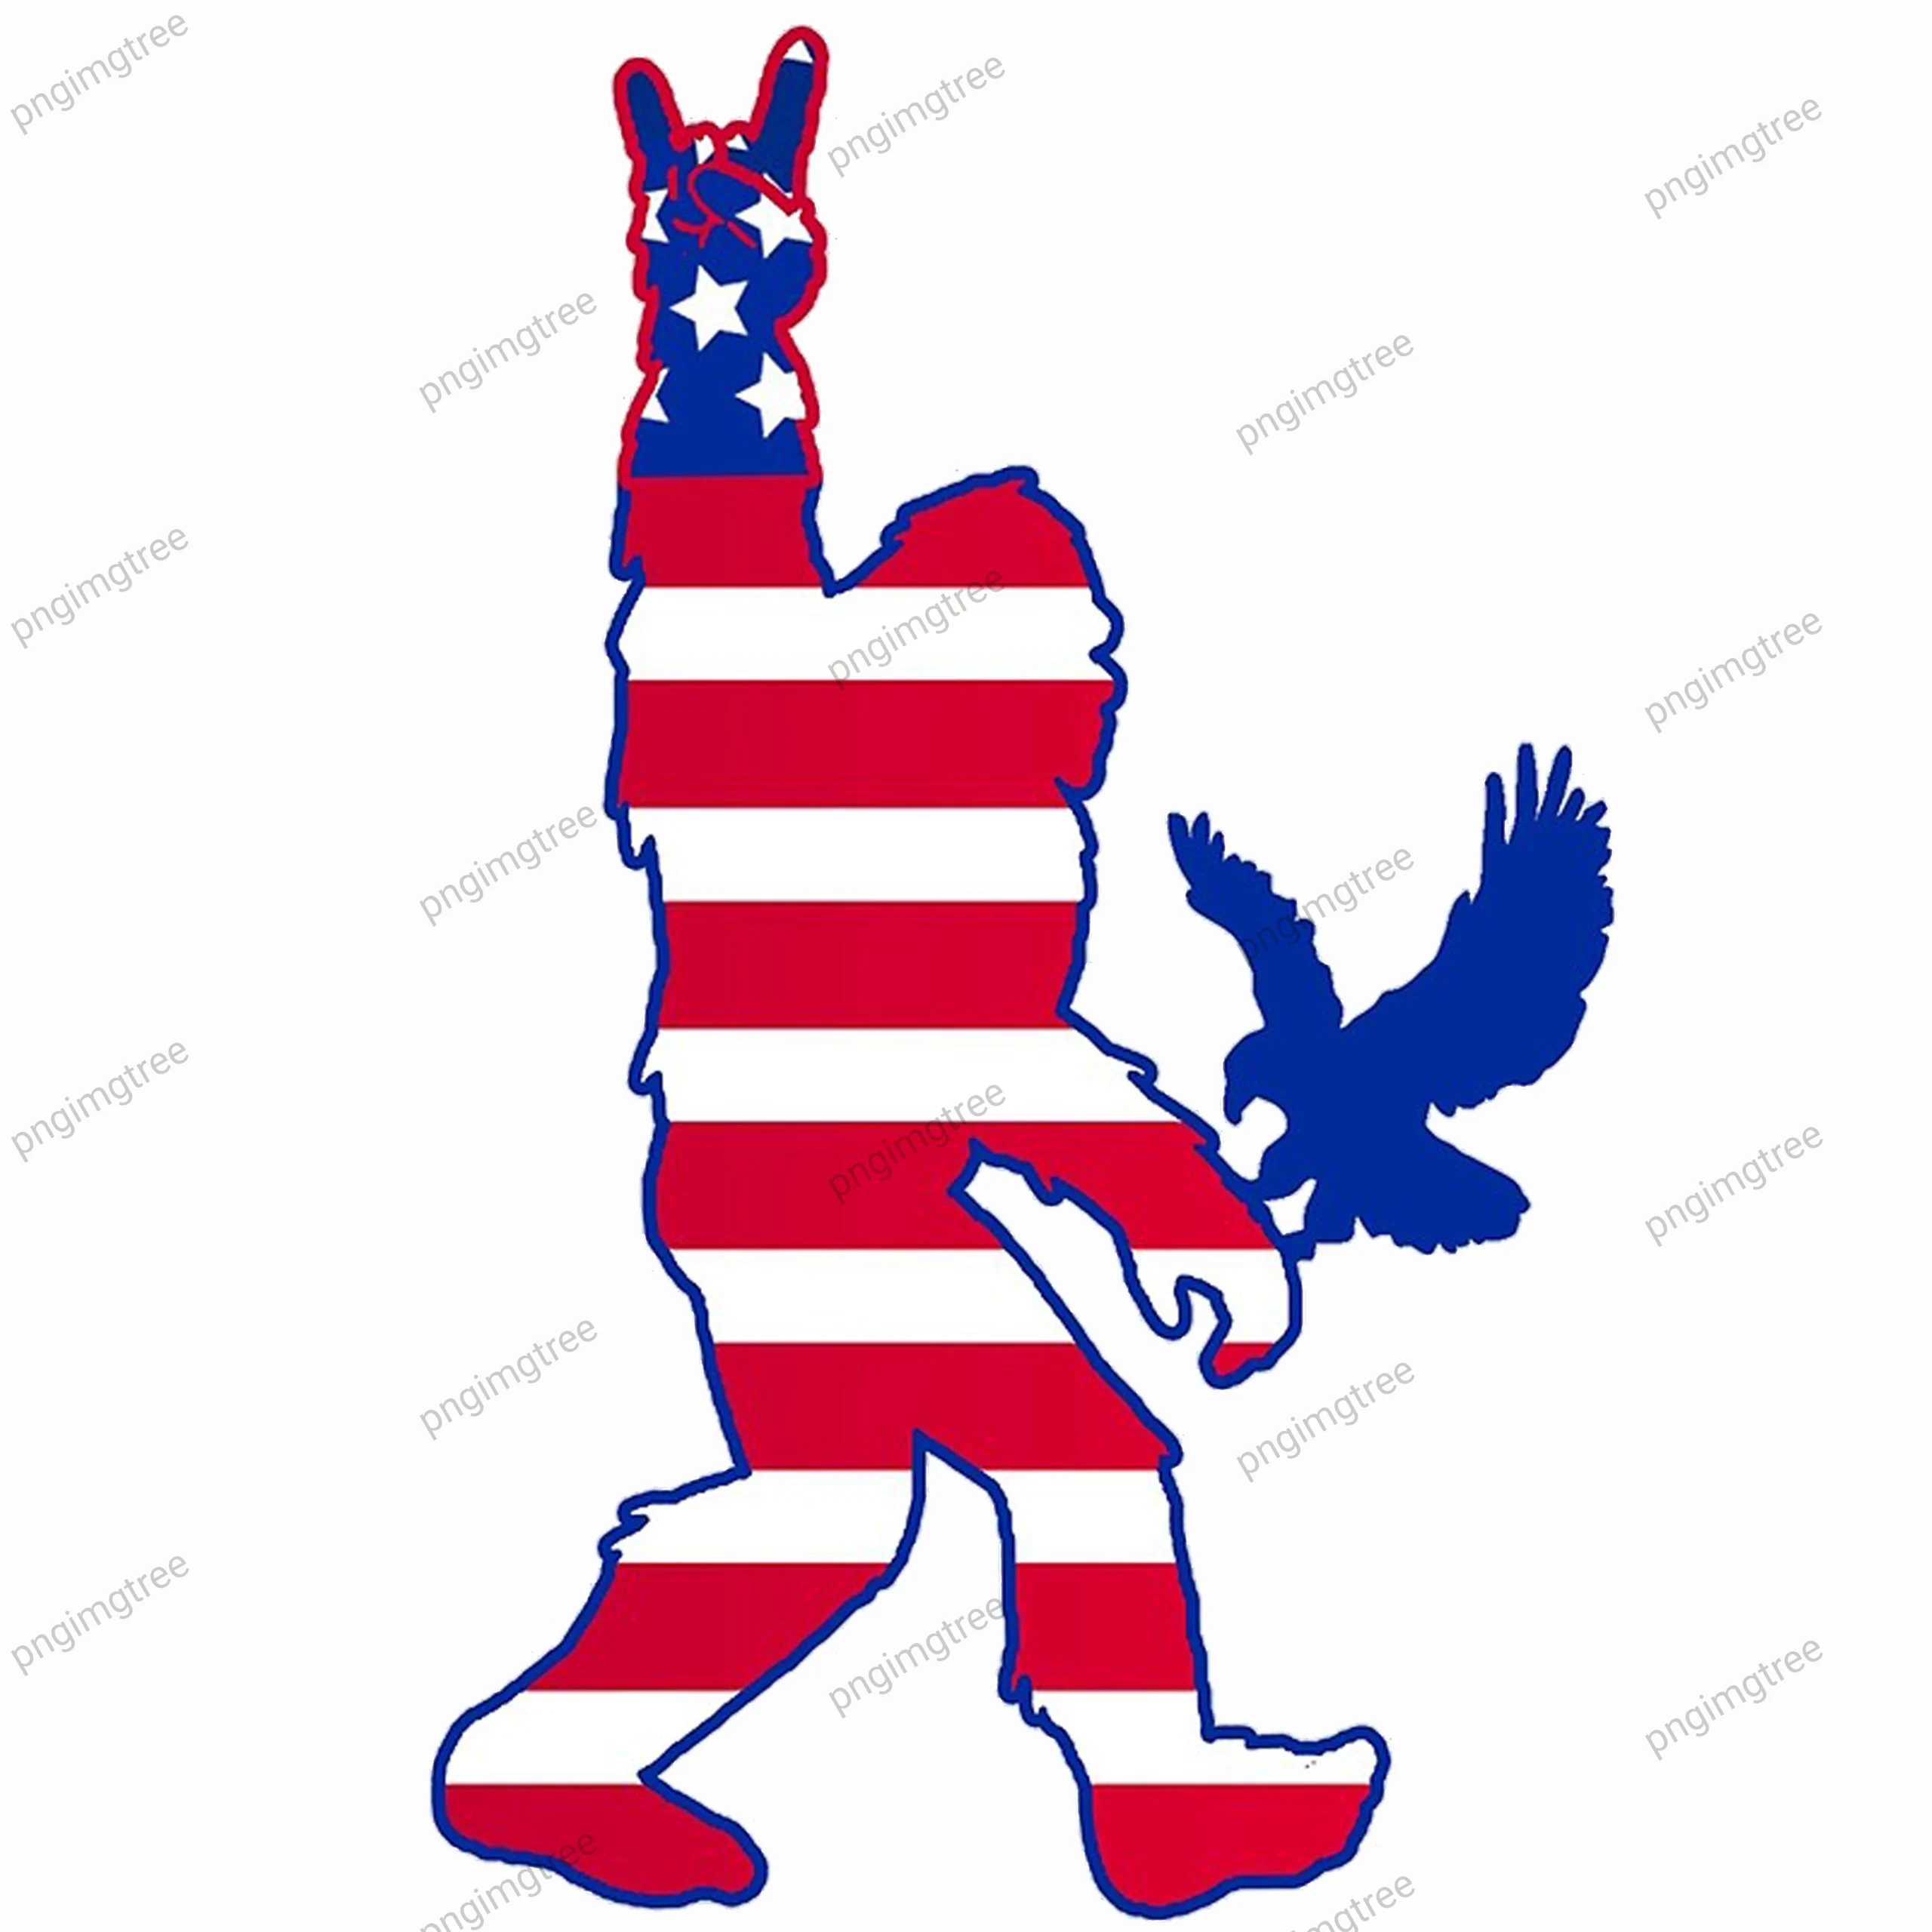 Bigfoot sticker and the USA flag on the left wrist and the right hand with a blue hawk standing on it